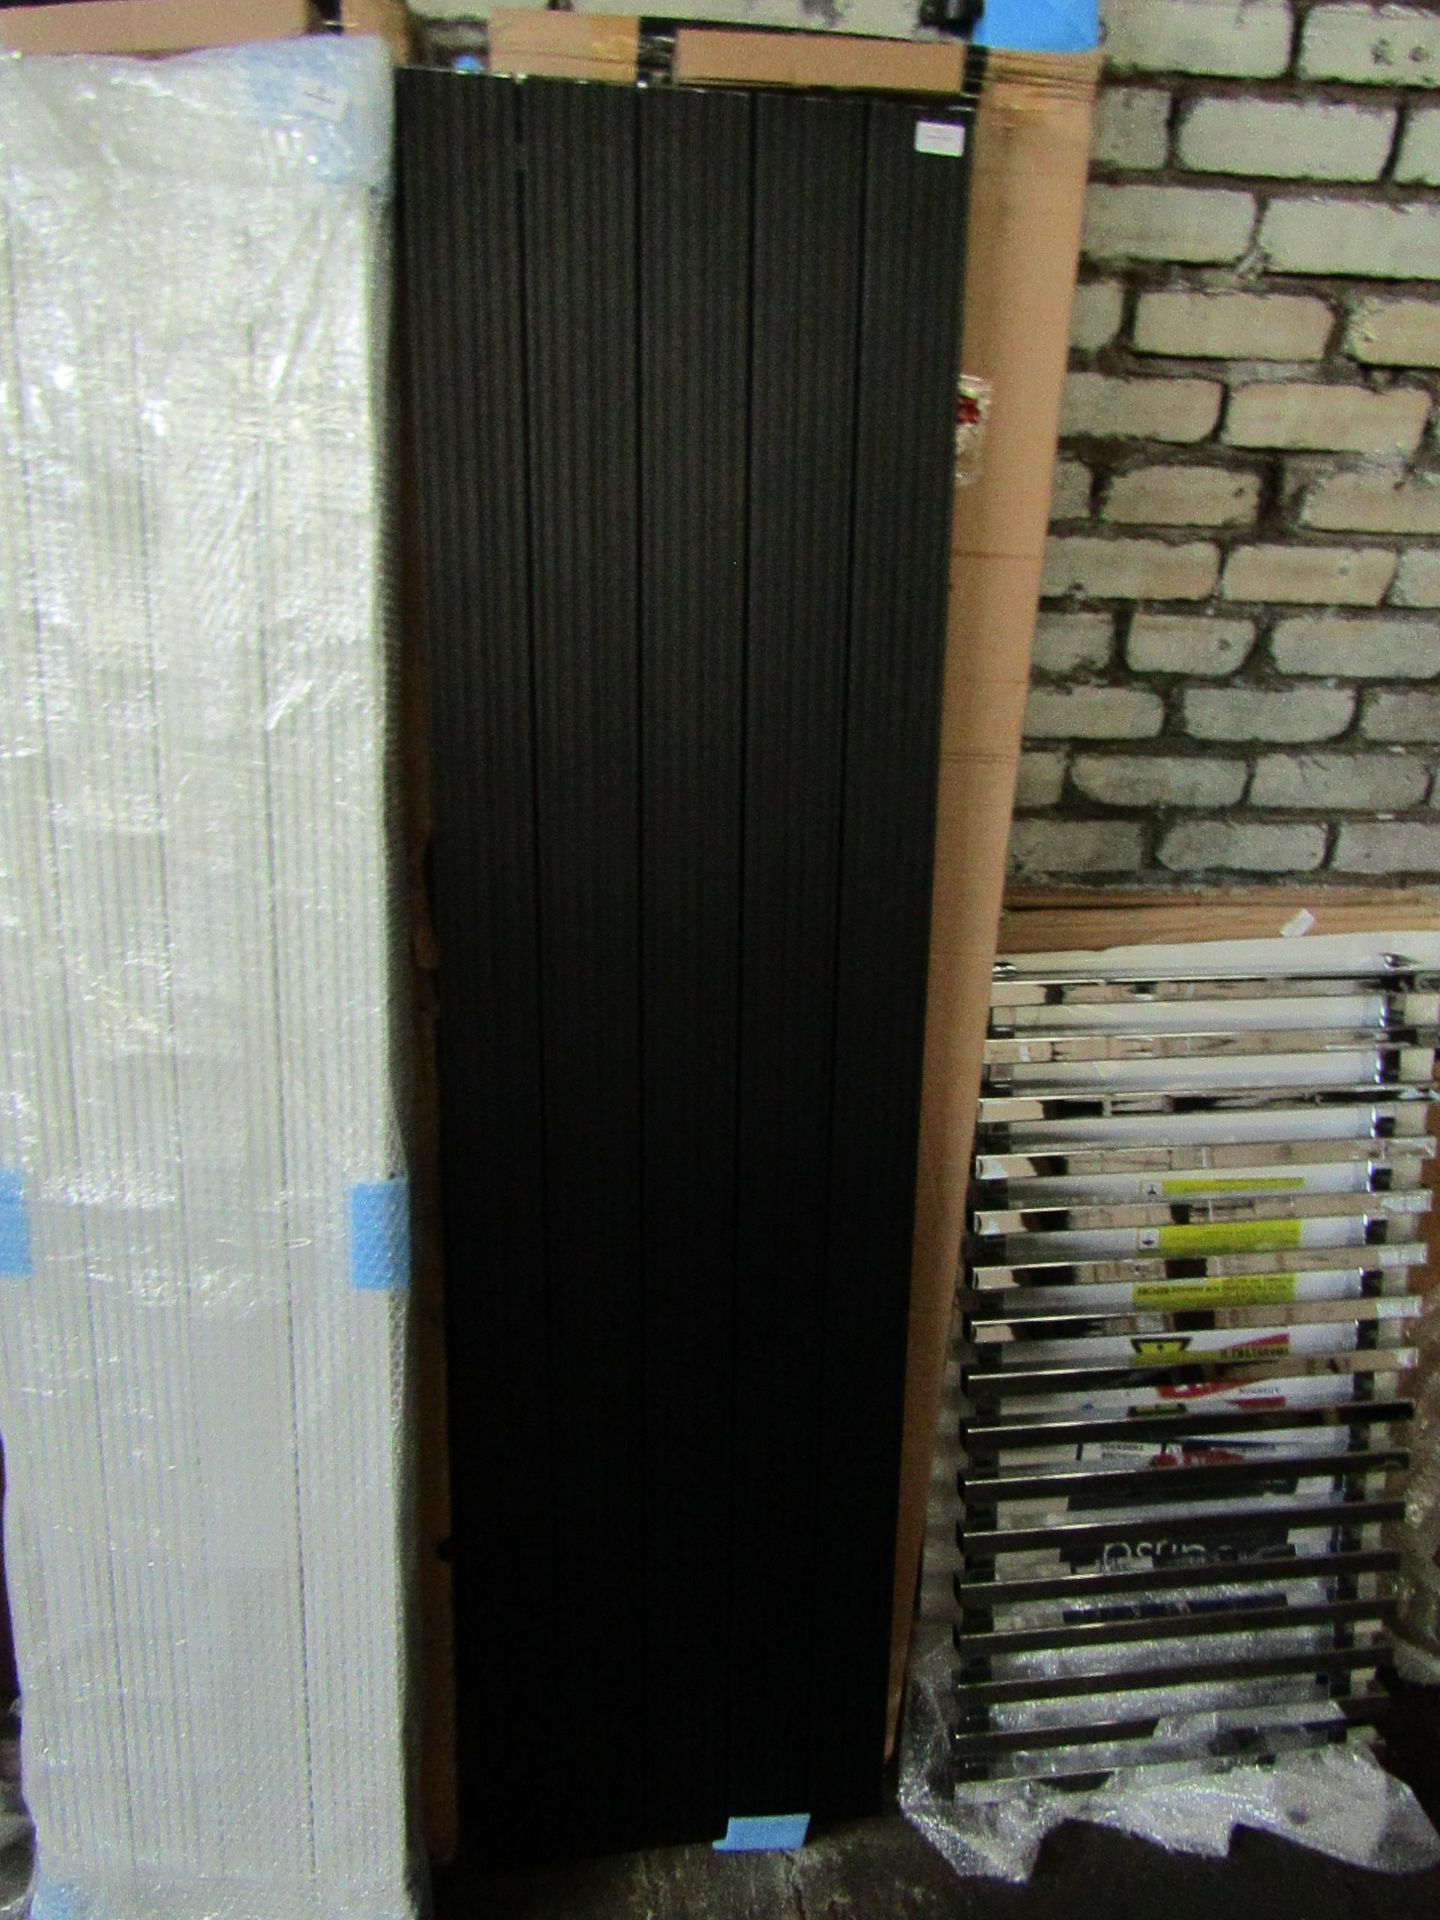 Carisa Nemo Monza textured Black radiator, 1800x470mm, has wall brackets, cannot see any damge - Image 2 of 2